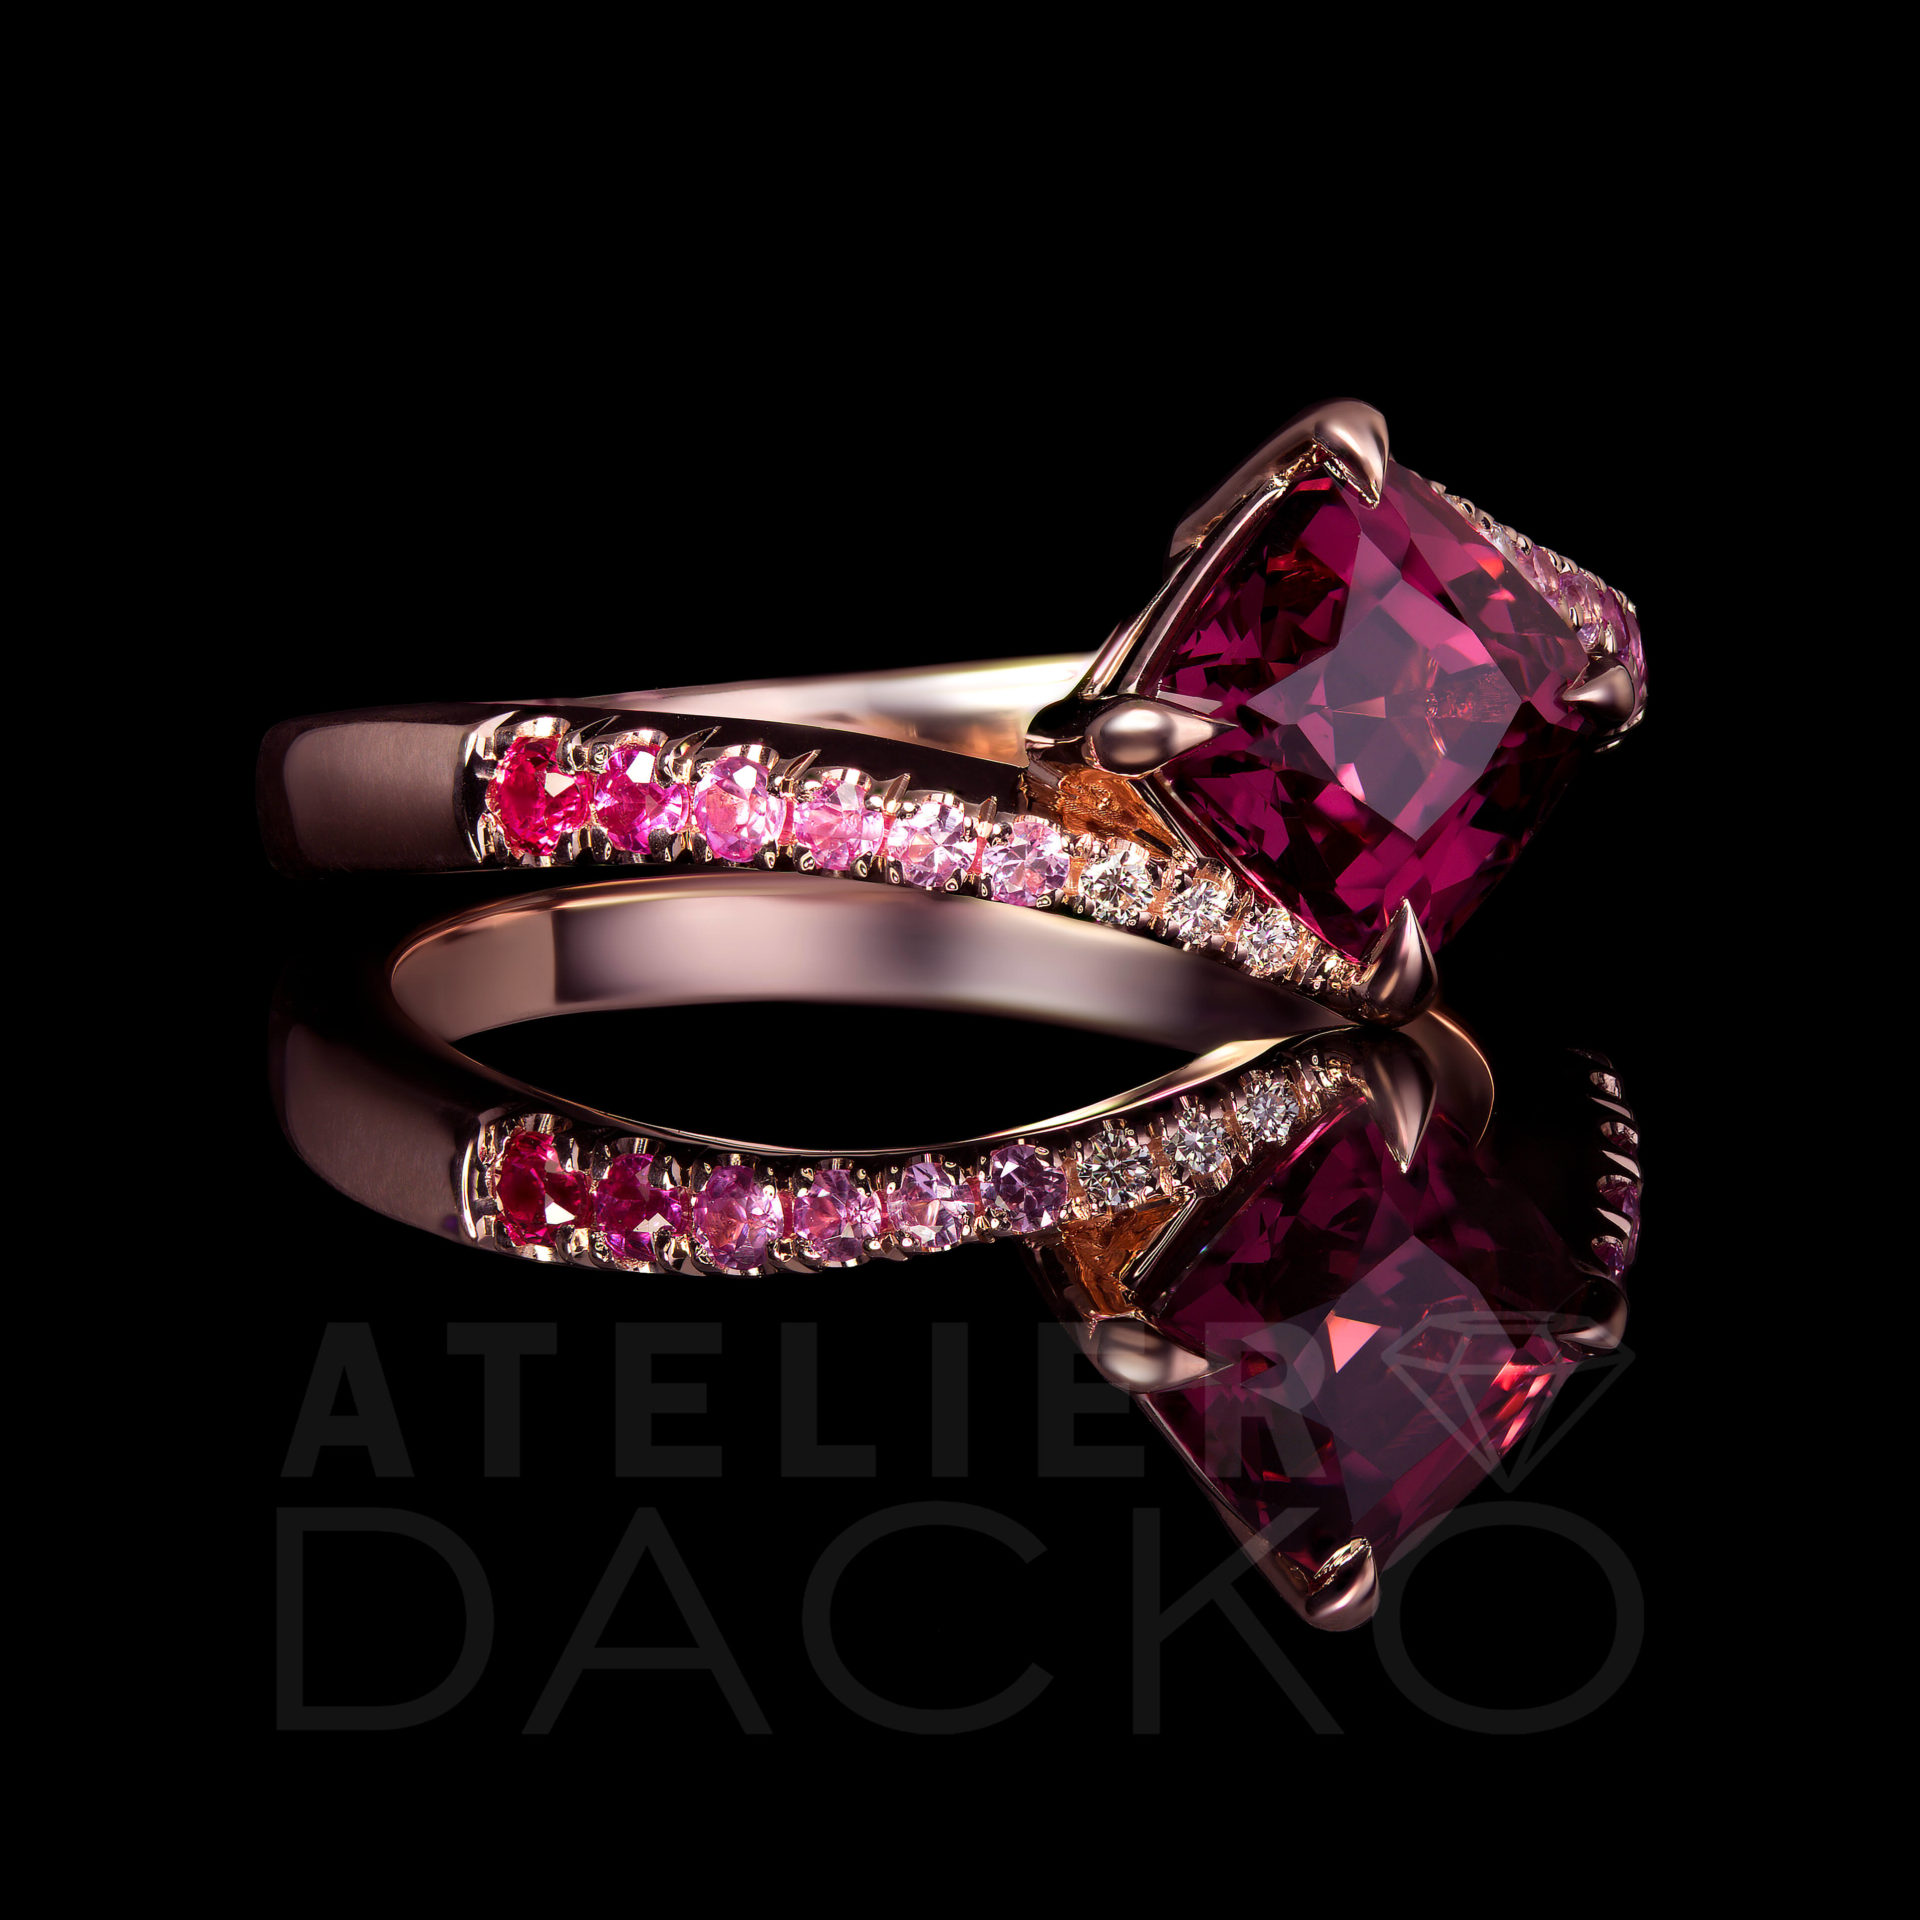 AD057 - 1.28 CT Raspberry Pink Spinel Ring with Gradient Shank - 2